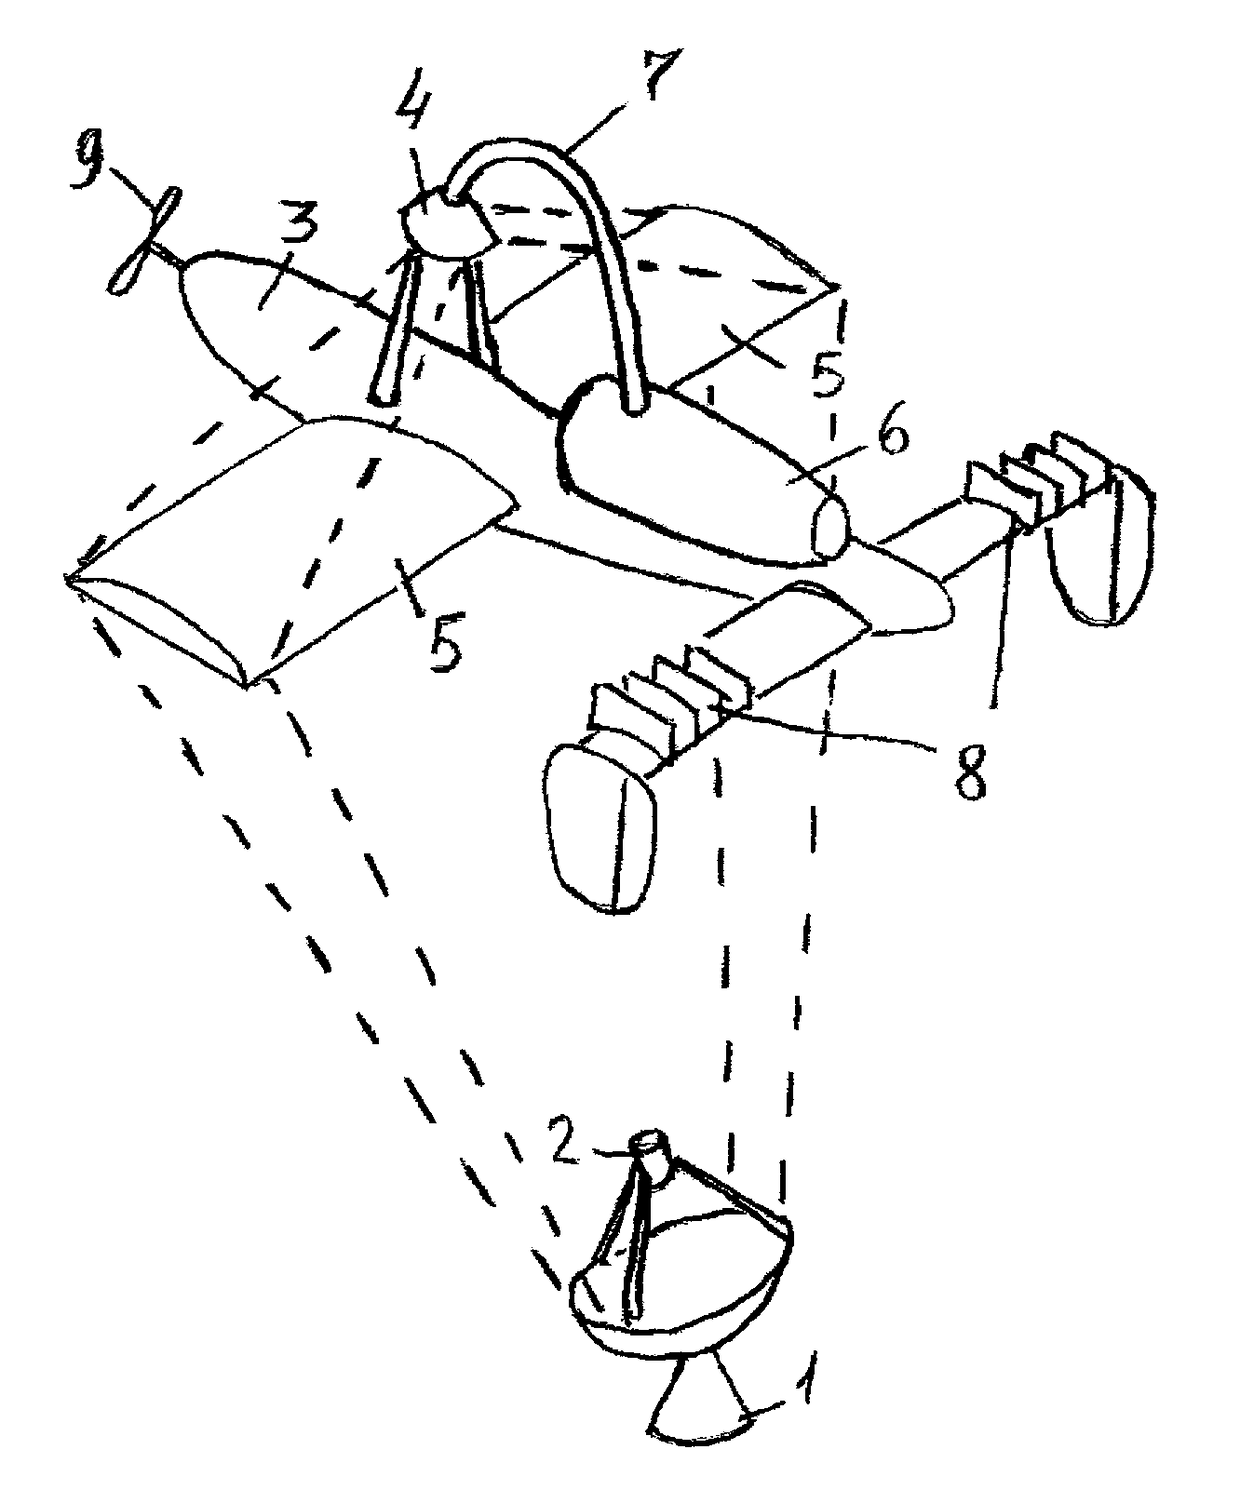 Methods of laser powering unmanned aerial vehicles with heat engines